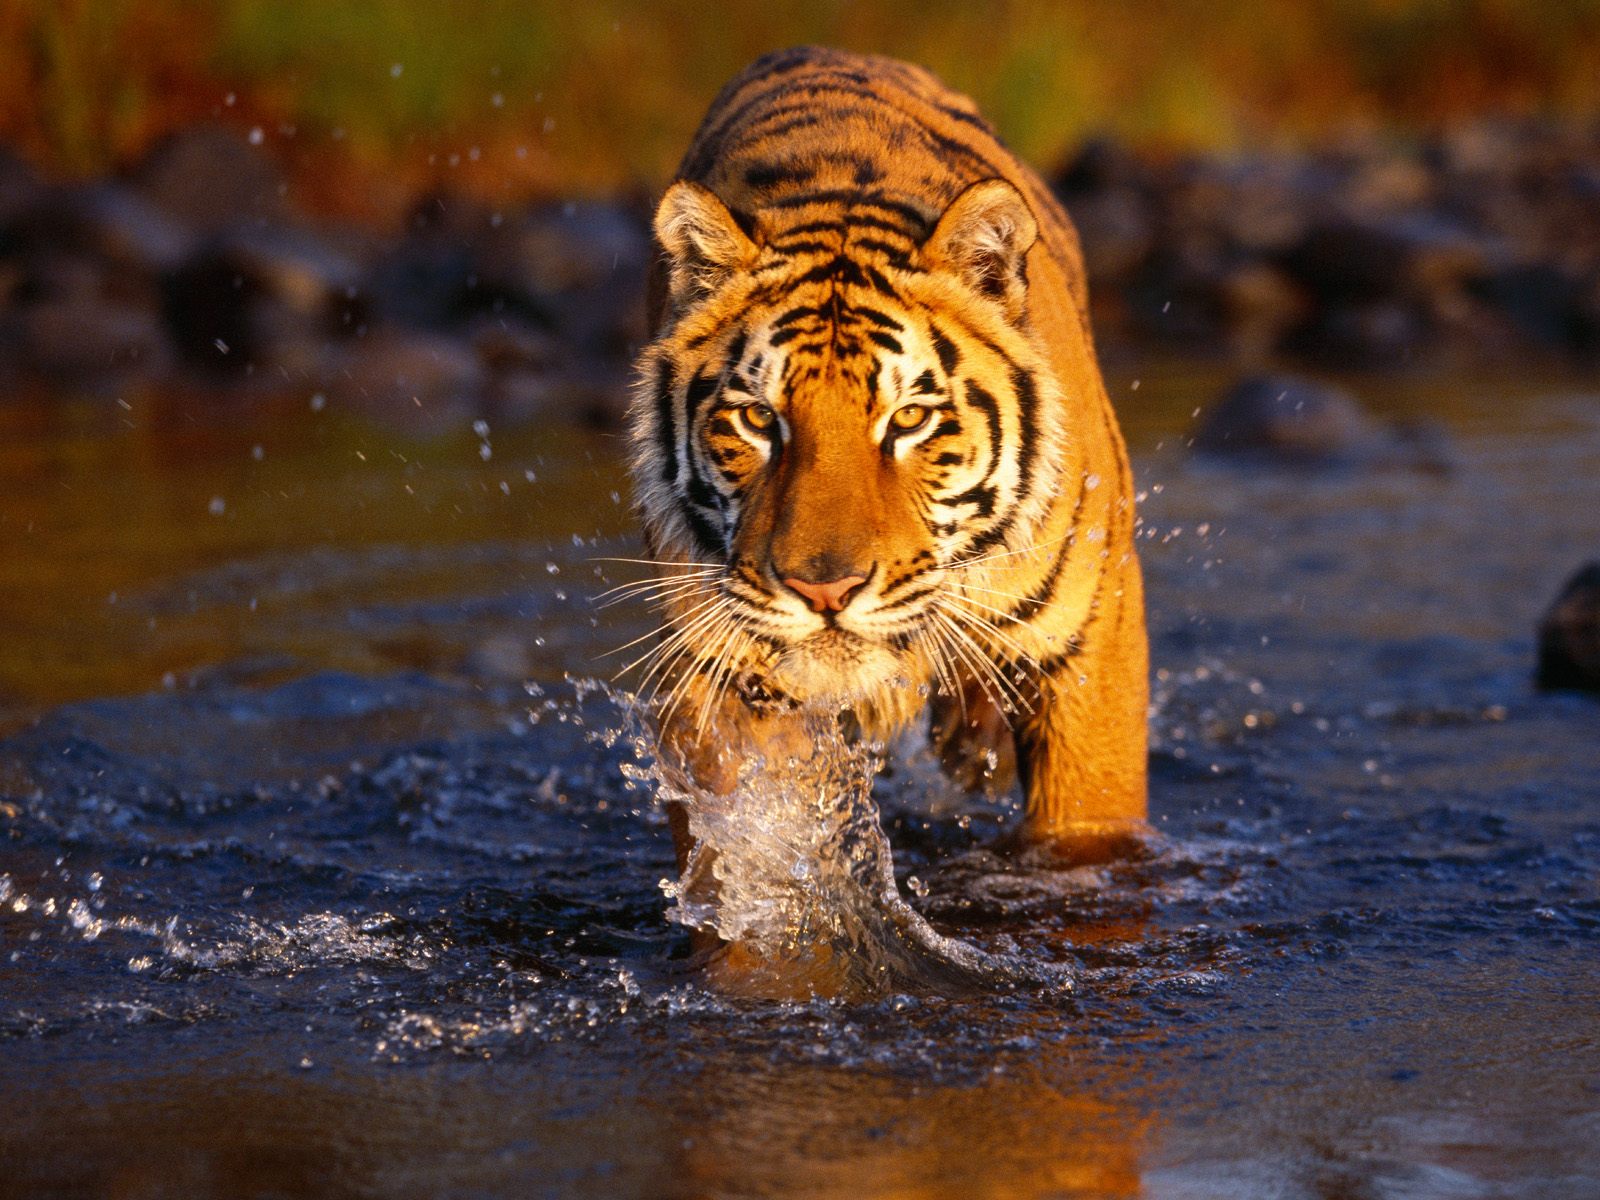 Tiger Water Wallpaper Photos Of Tigers HD Here We Have